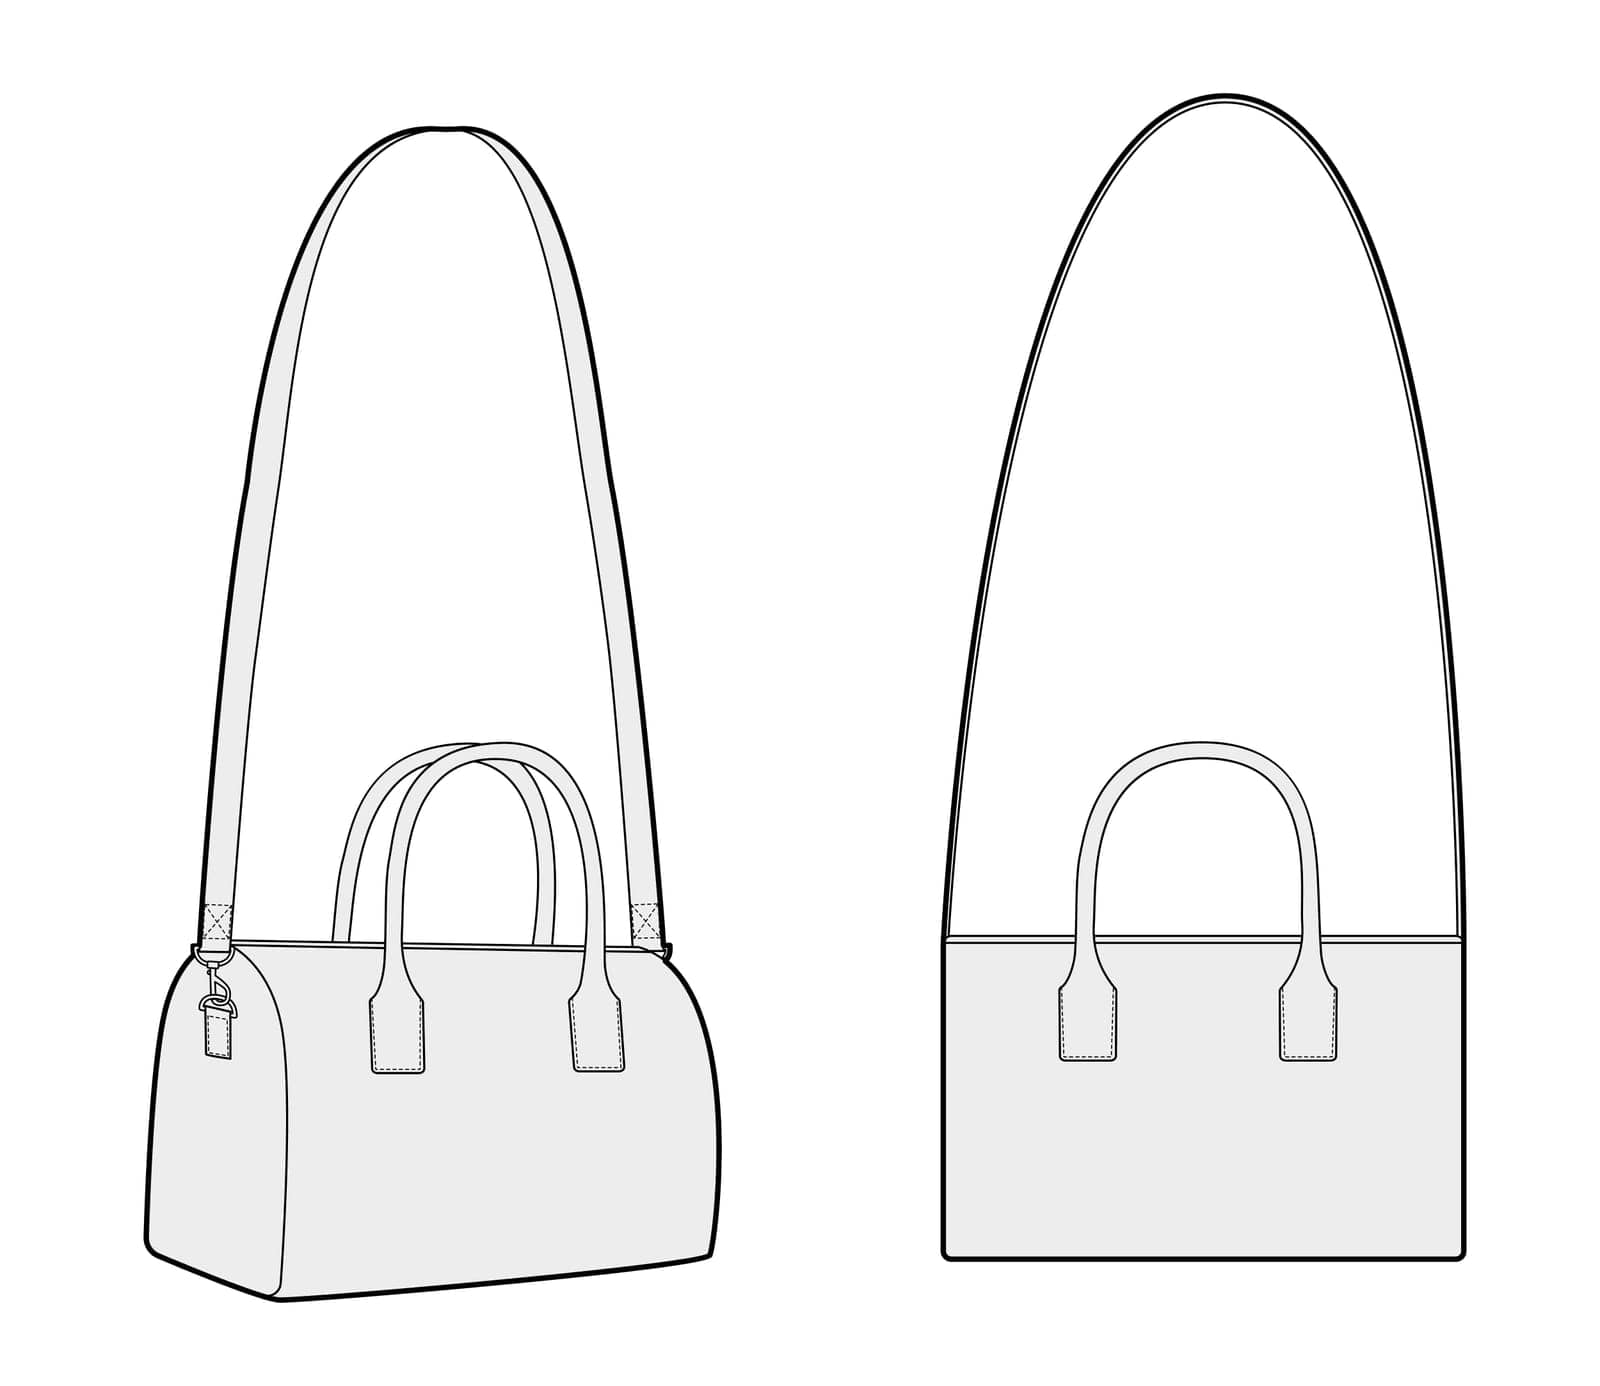 Mini Bowling Cross-Body Tote with removable strap options bag. Fashion accessory technical illustration. Vector satchel front 3-4 view for Men, women style, flat handbag CAD mockup sketch outline